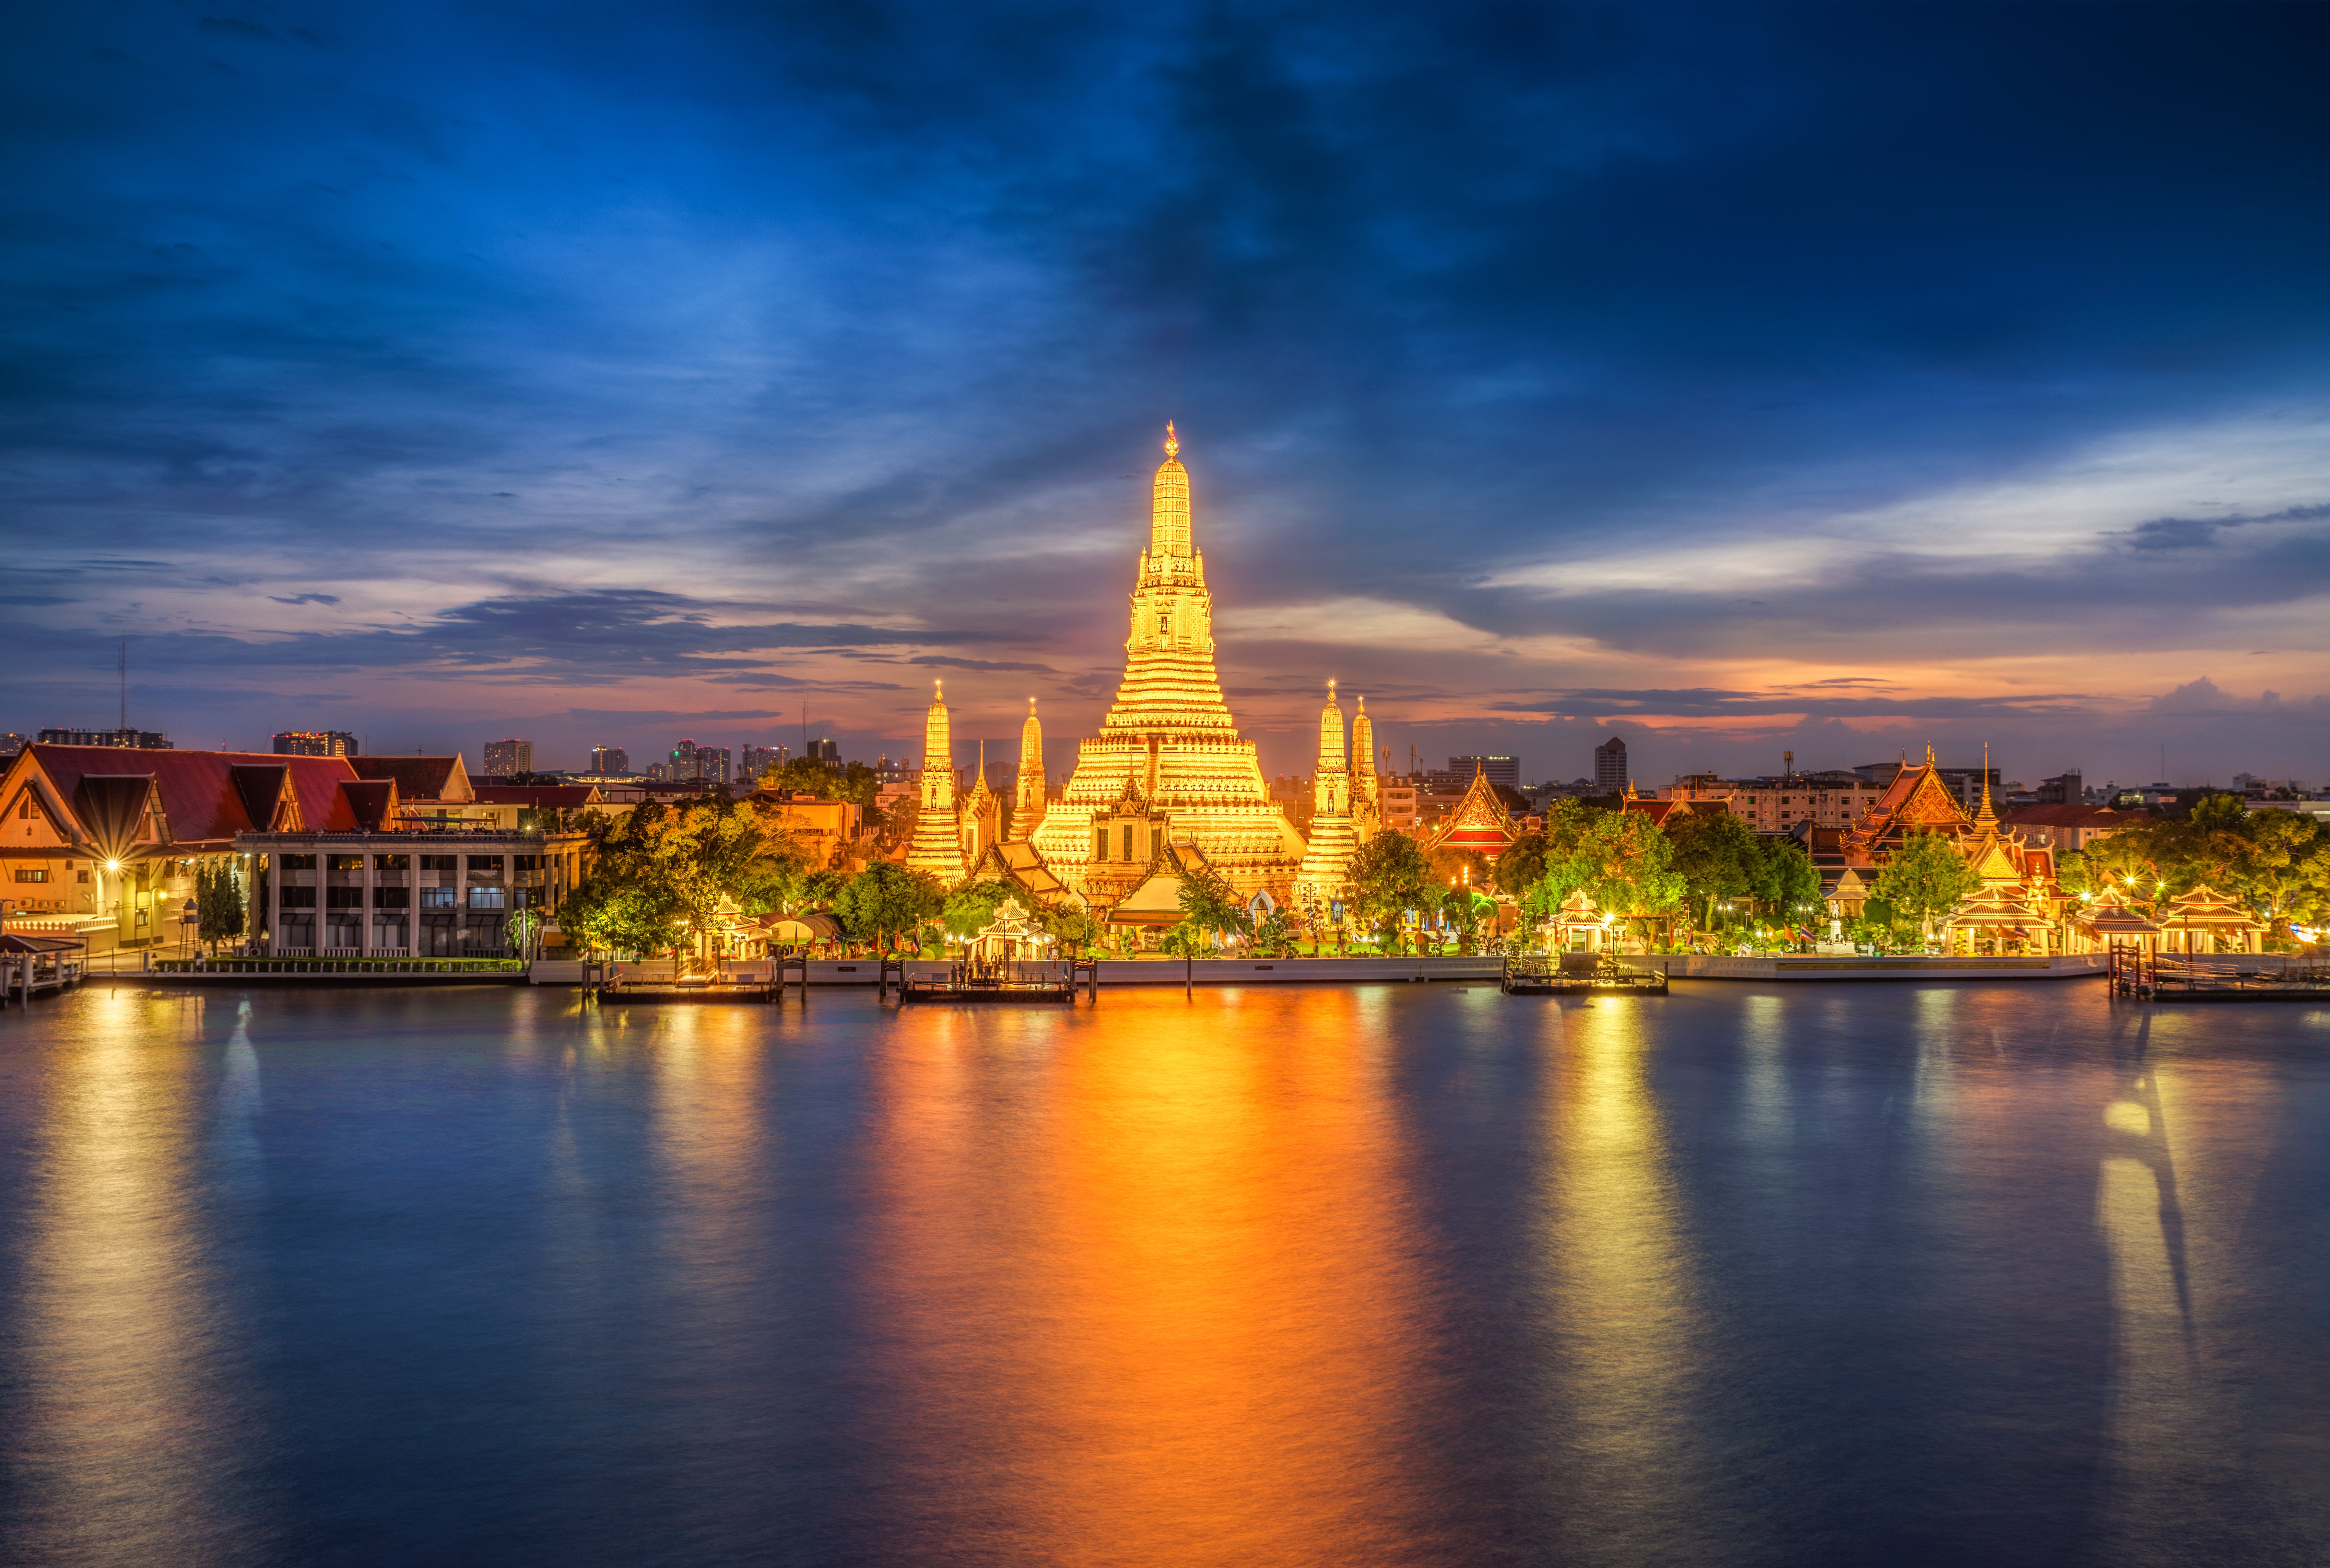 The Southeast Asian country expects 25 million visitors during 2023